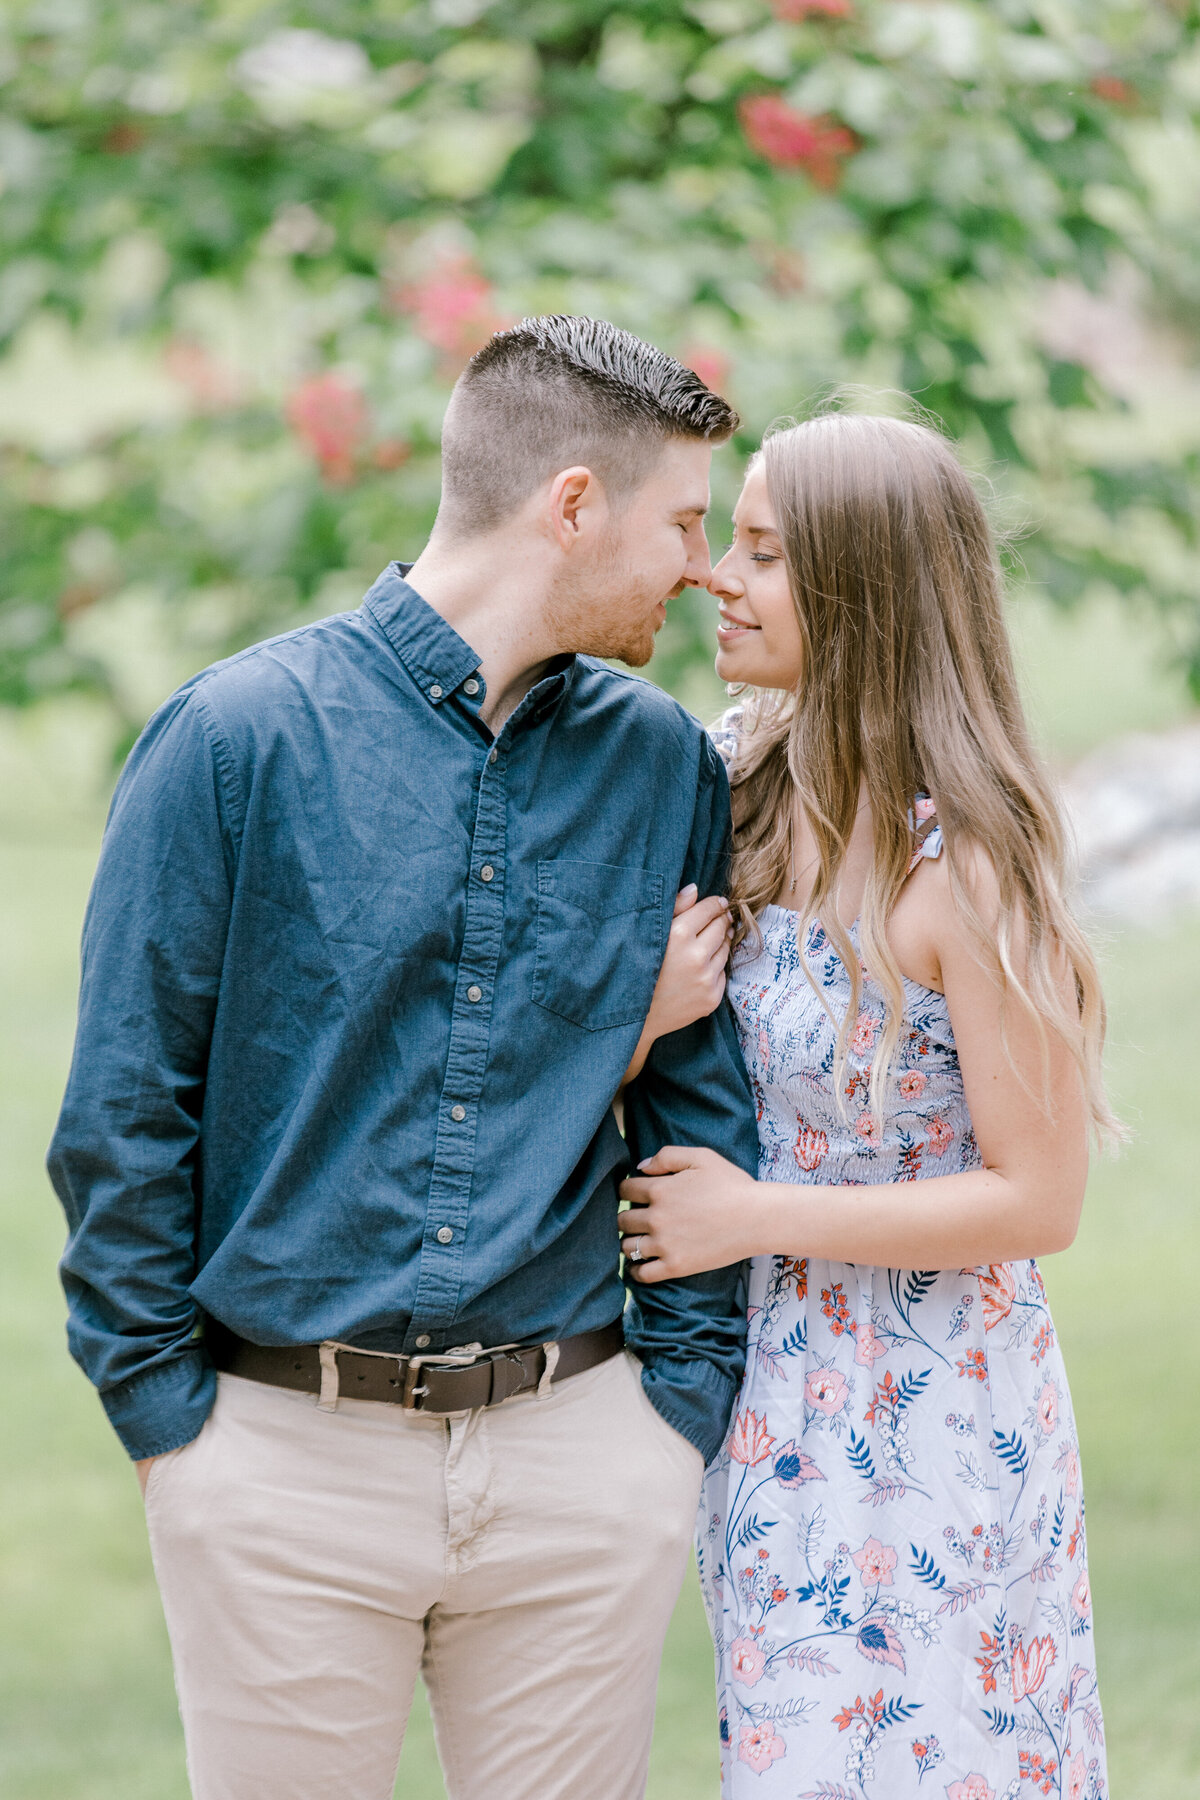 Hershey Garden Engagement Session Photography Photo-6